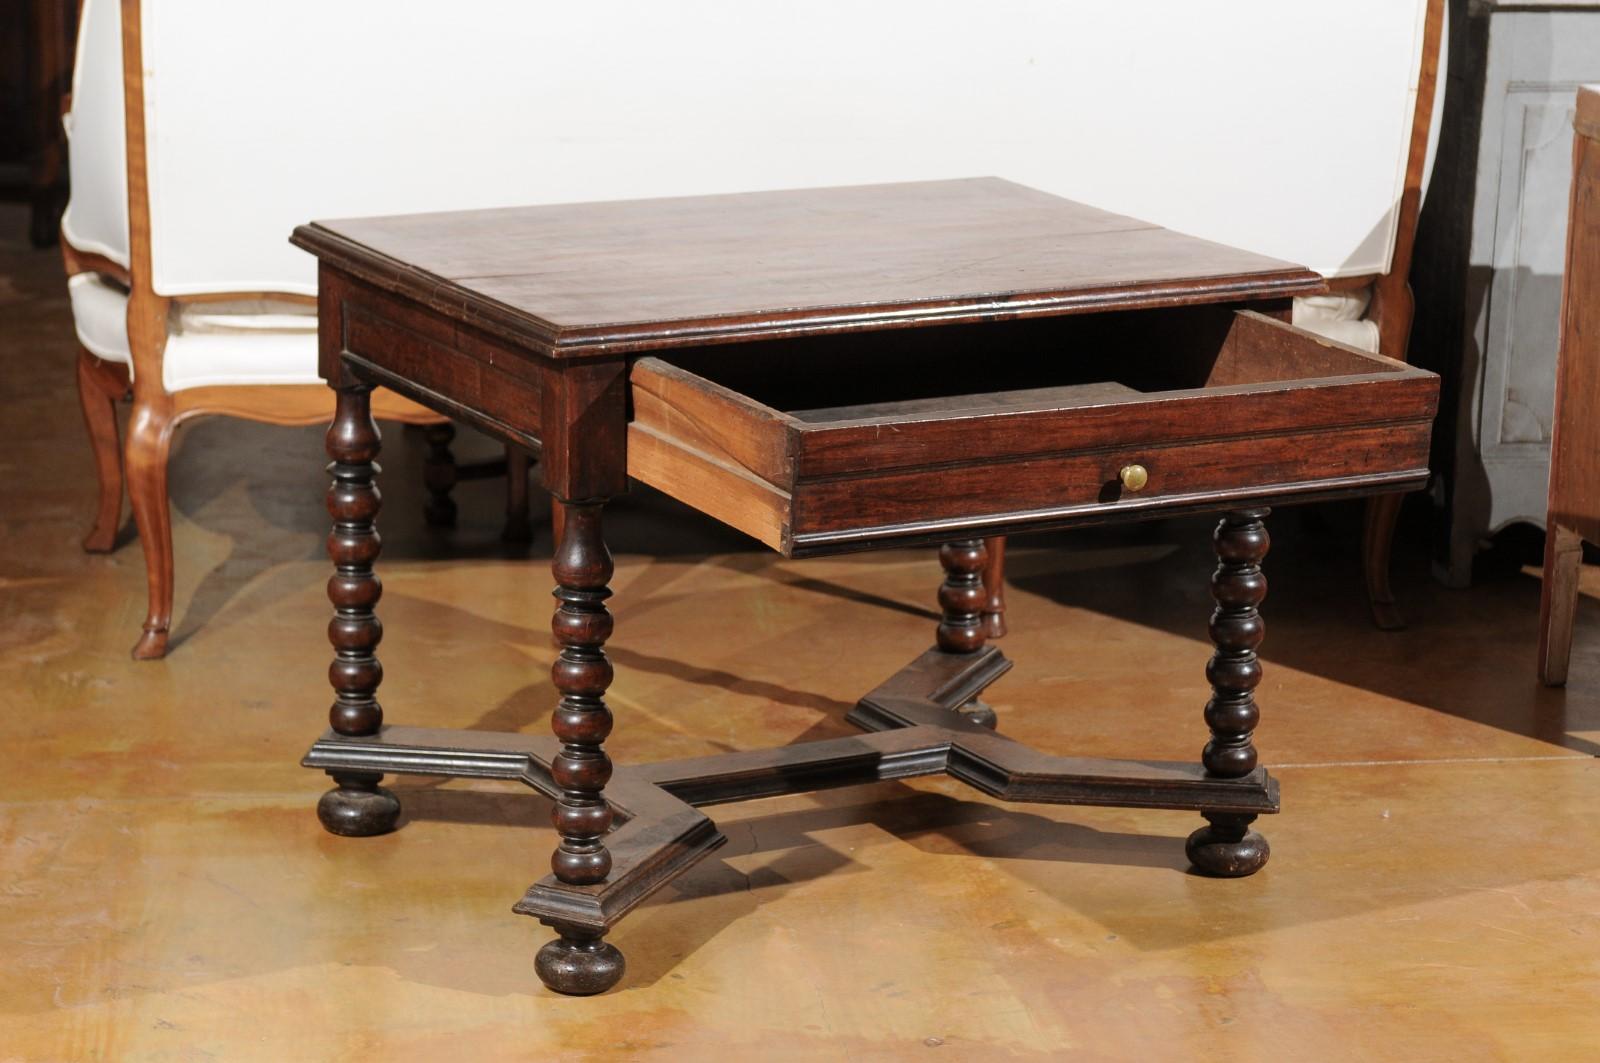 French 17th Century Louis XIII Walnut Side Table with Bobbin Legs and Stretcher In Good Condition For Sale In Atlanta, GA